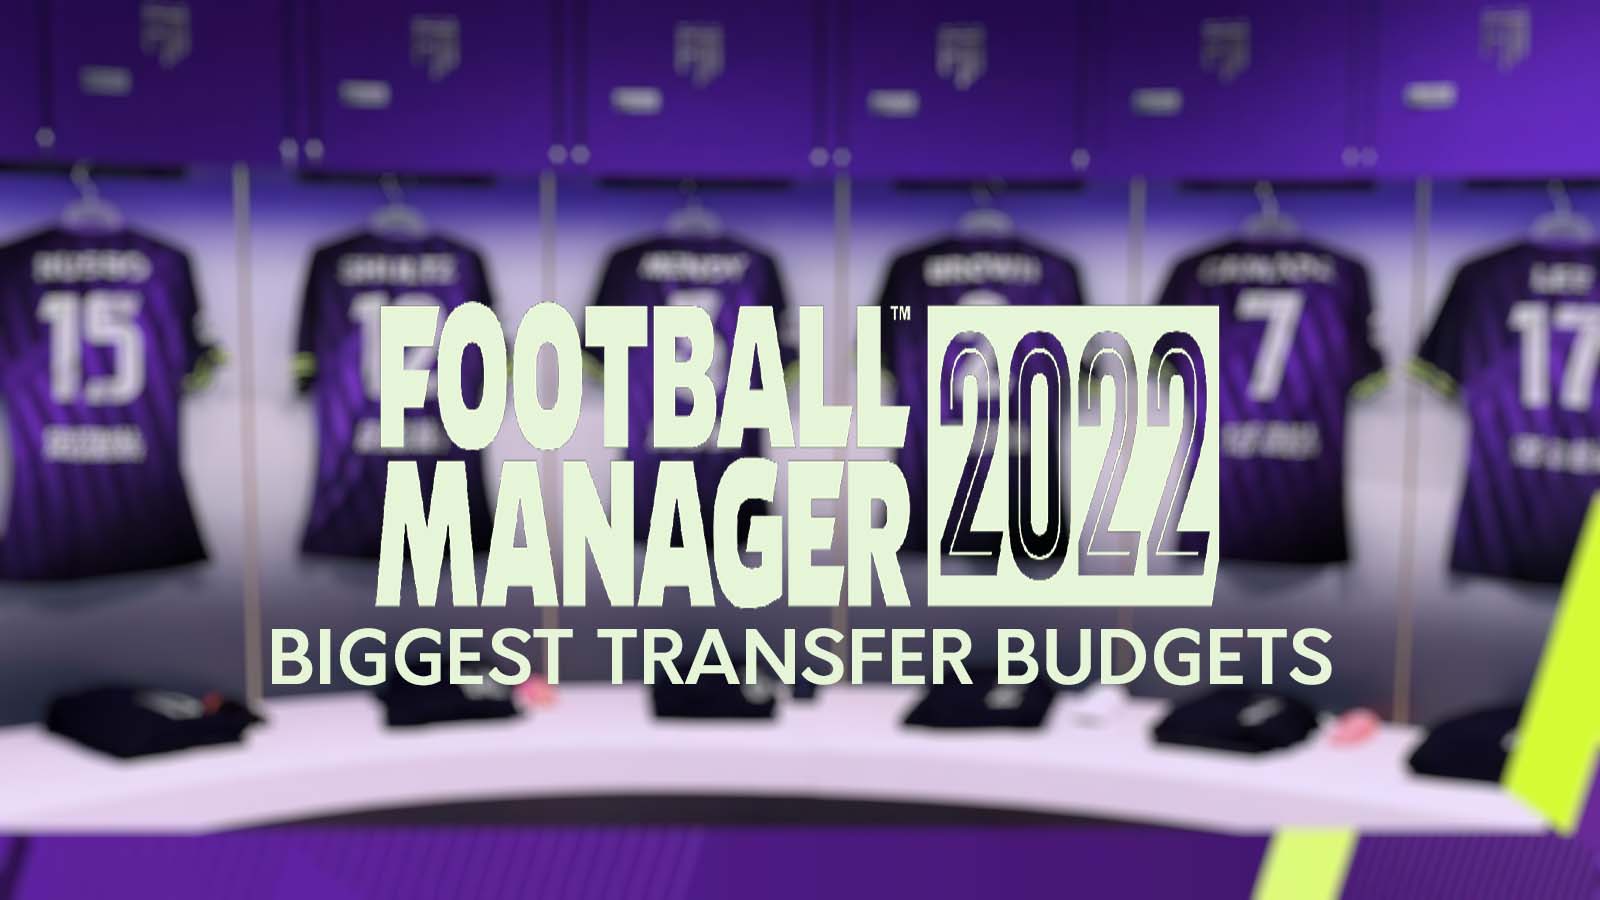 Football Manager 2022 biggest transfer budgets